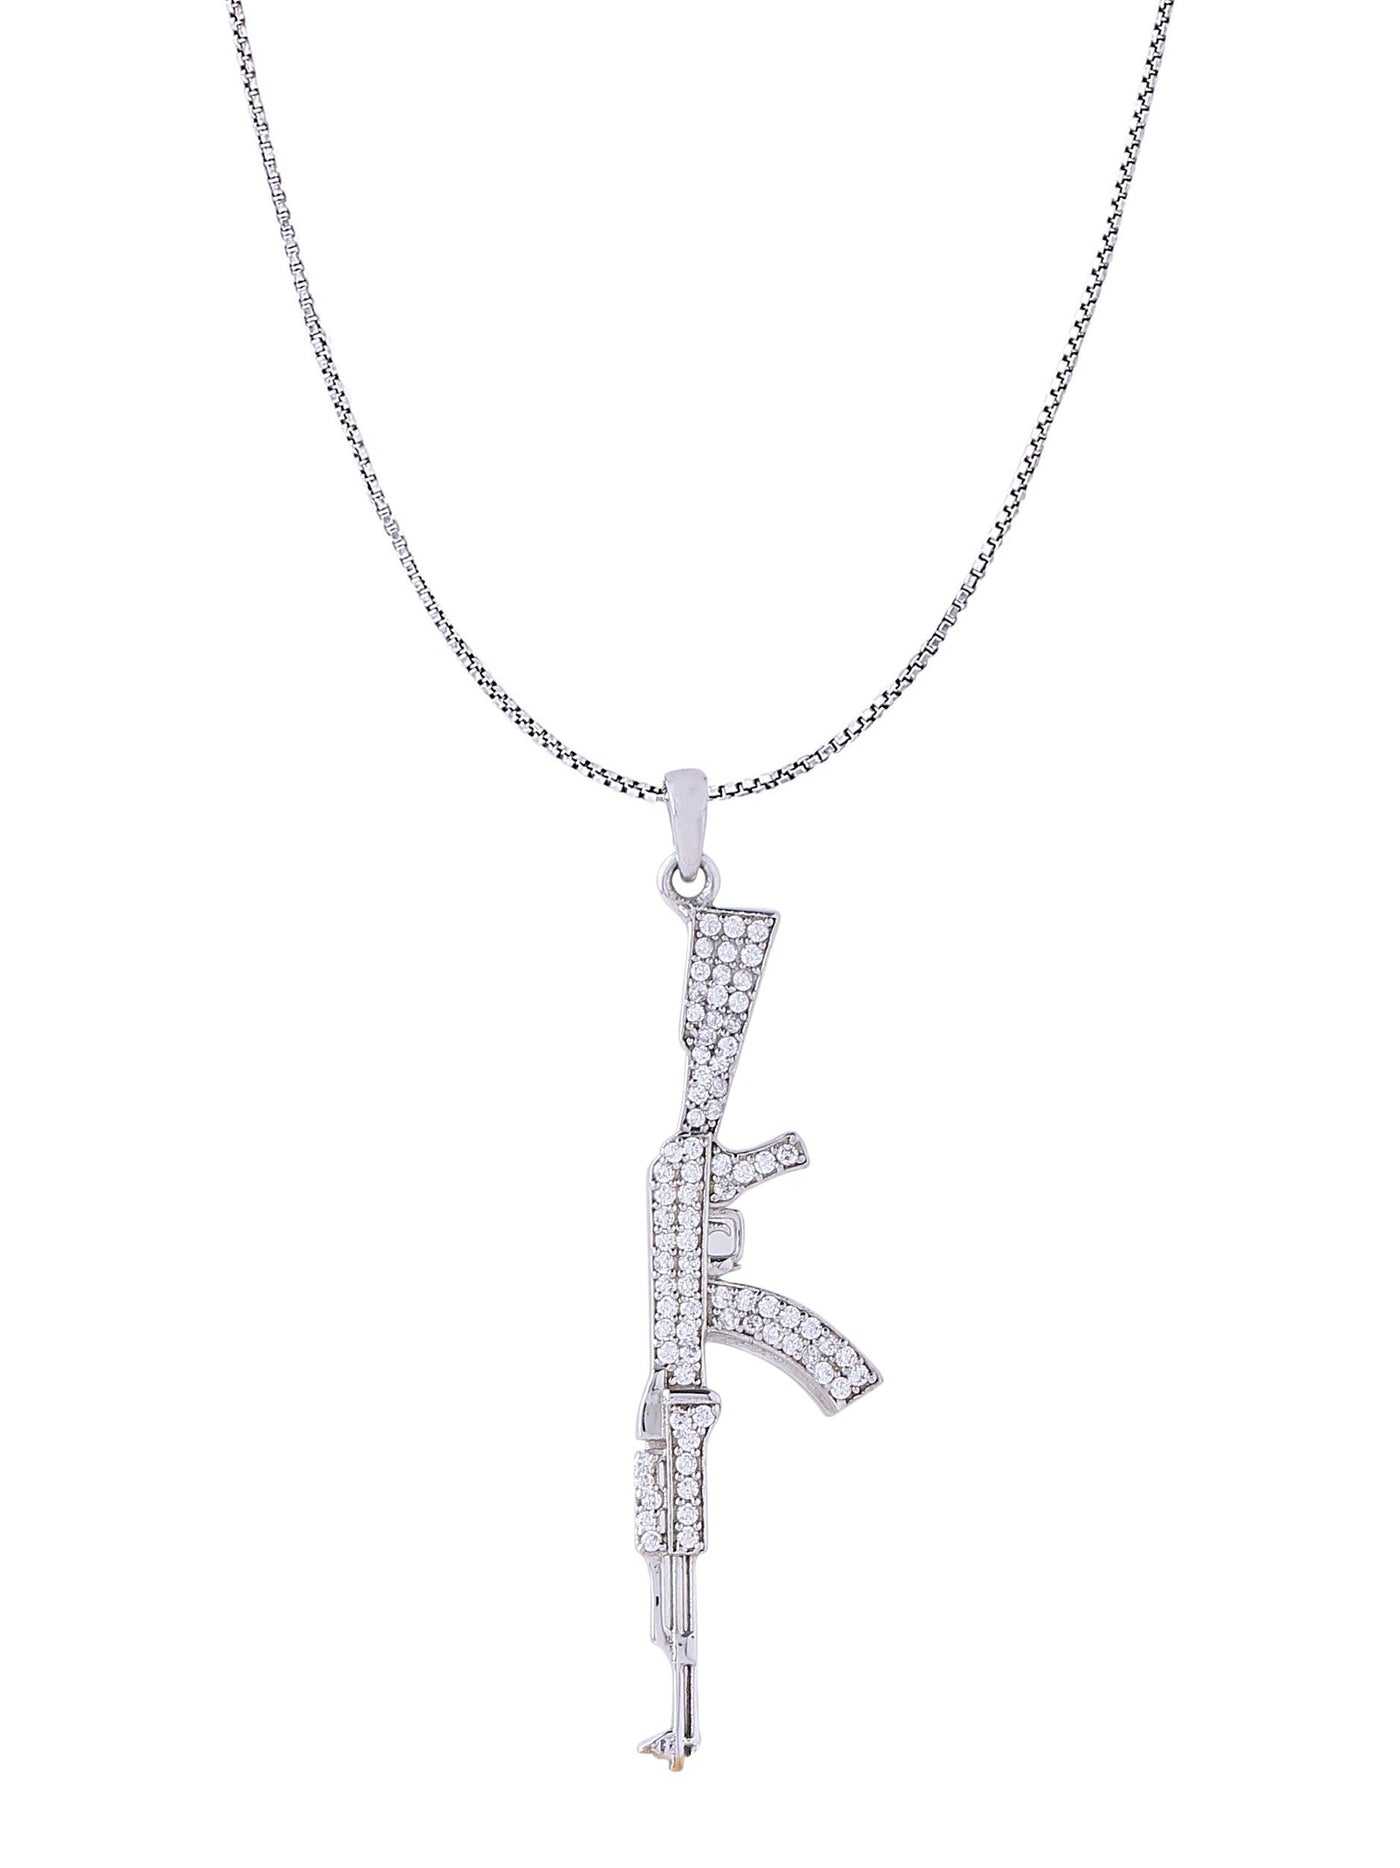 Ak47 Pendant is a White Gold Color Pendant Made of 925 Sterling Silver Material with 20 Inch Long Silver Chain